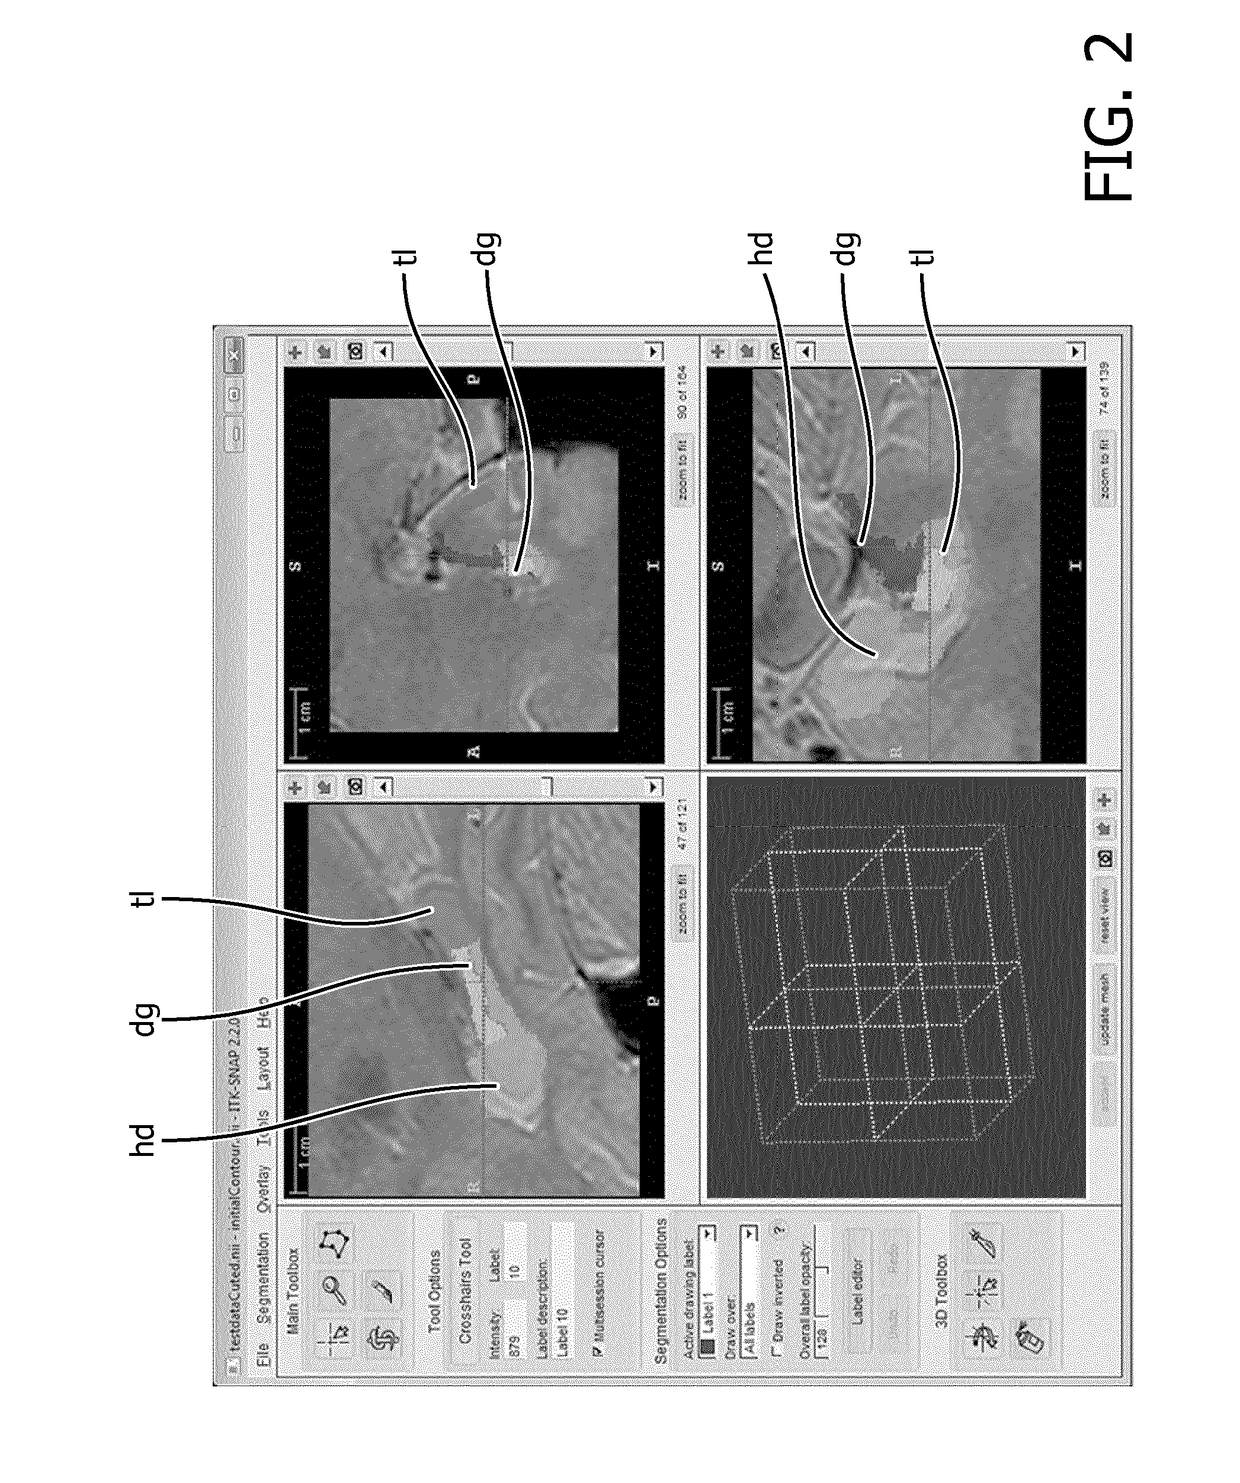 MRI protocol for segmentation of an image detail using images acquired at two different magnetic field strengths